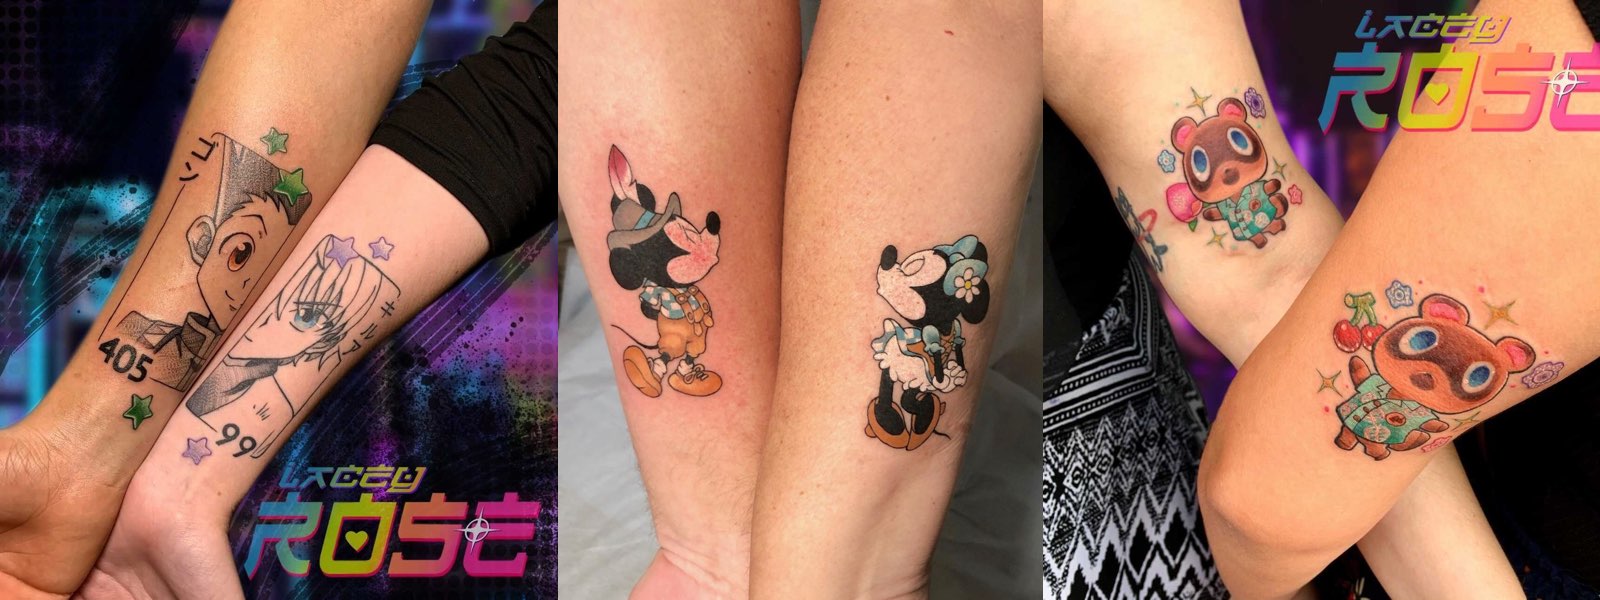 13 Cute Couple Tattoos that Celebrate Love  Inside Out